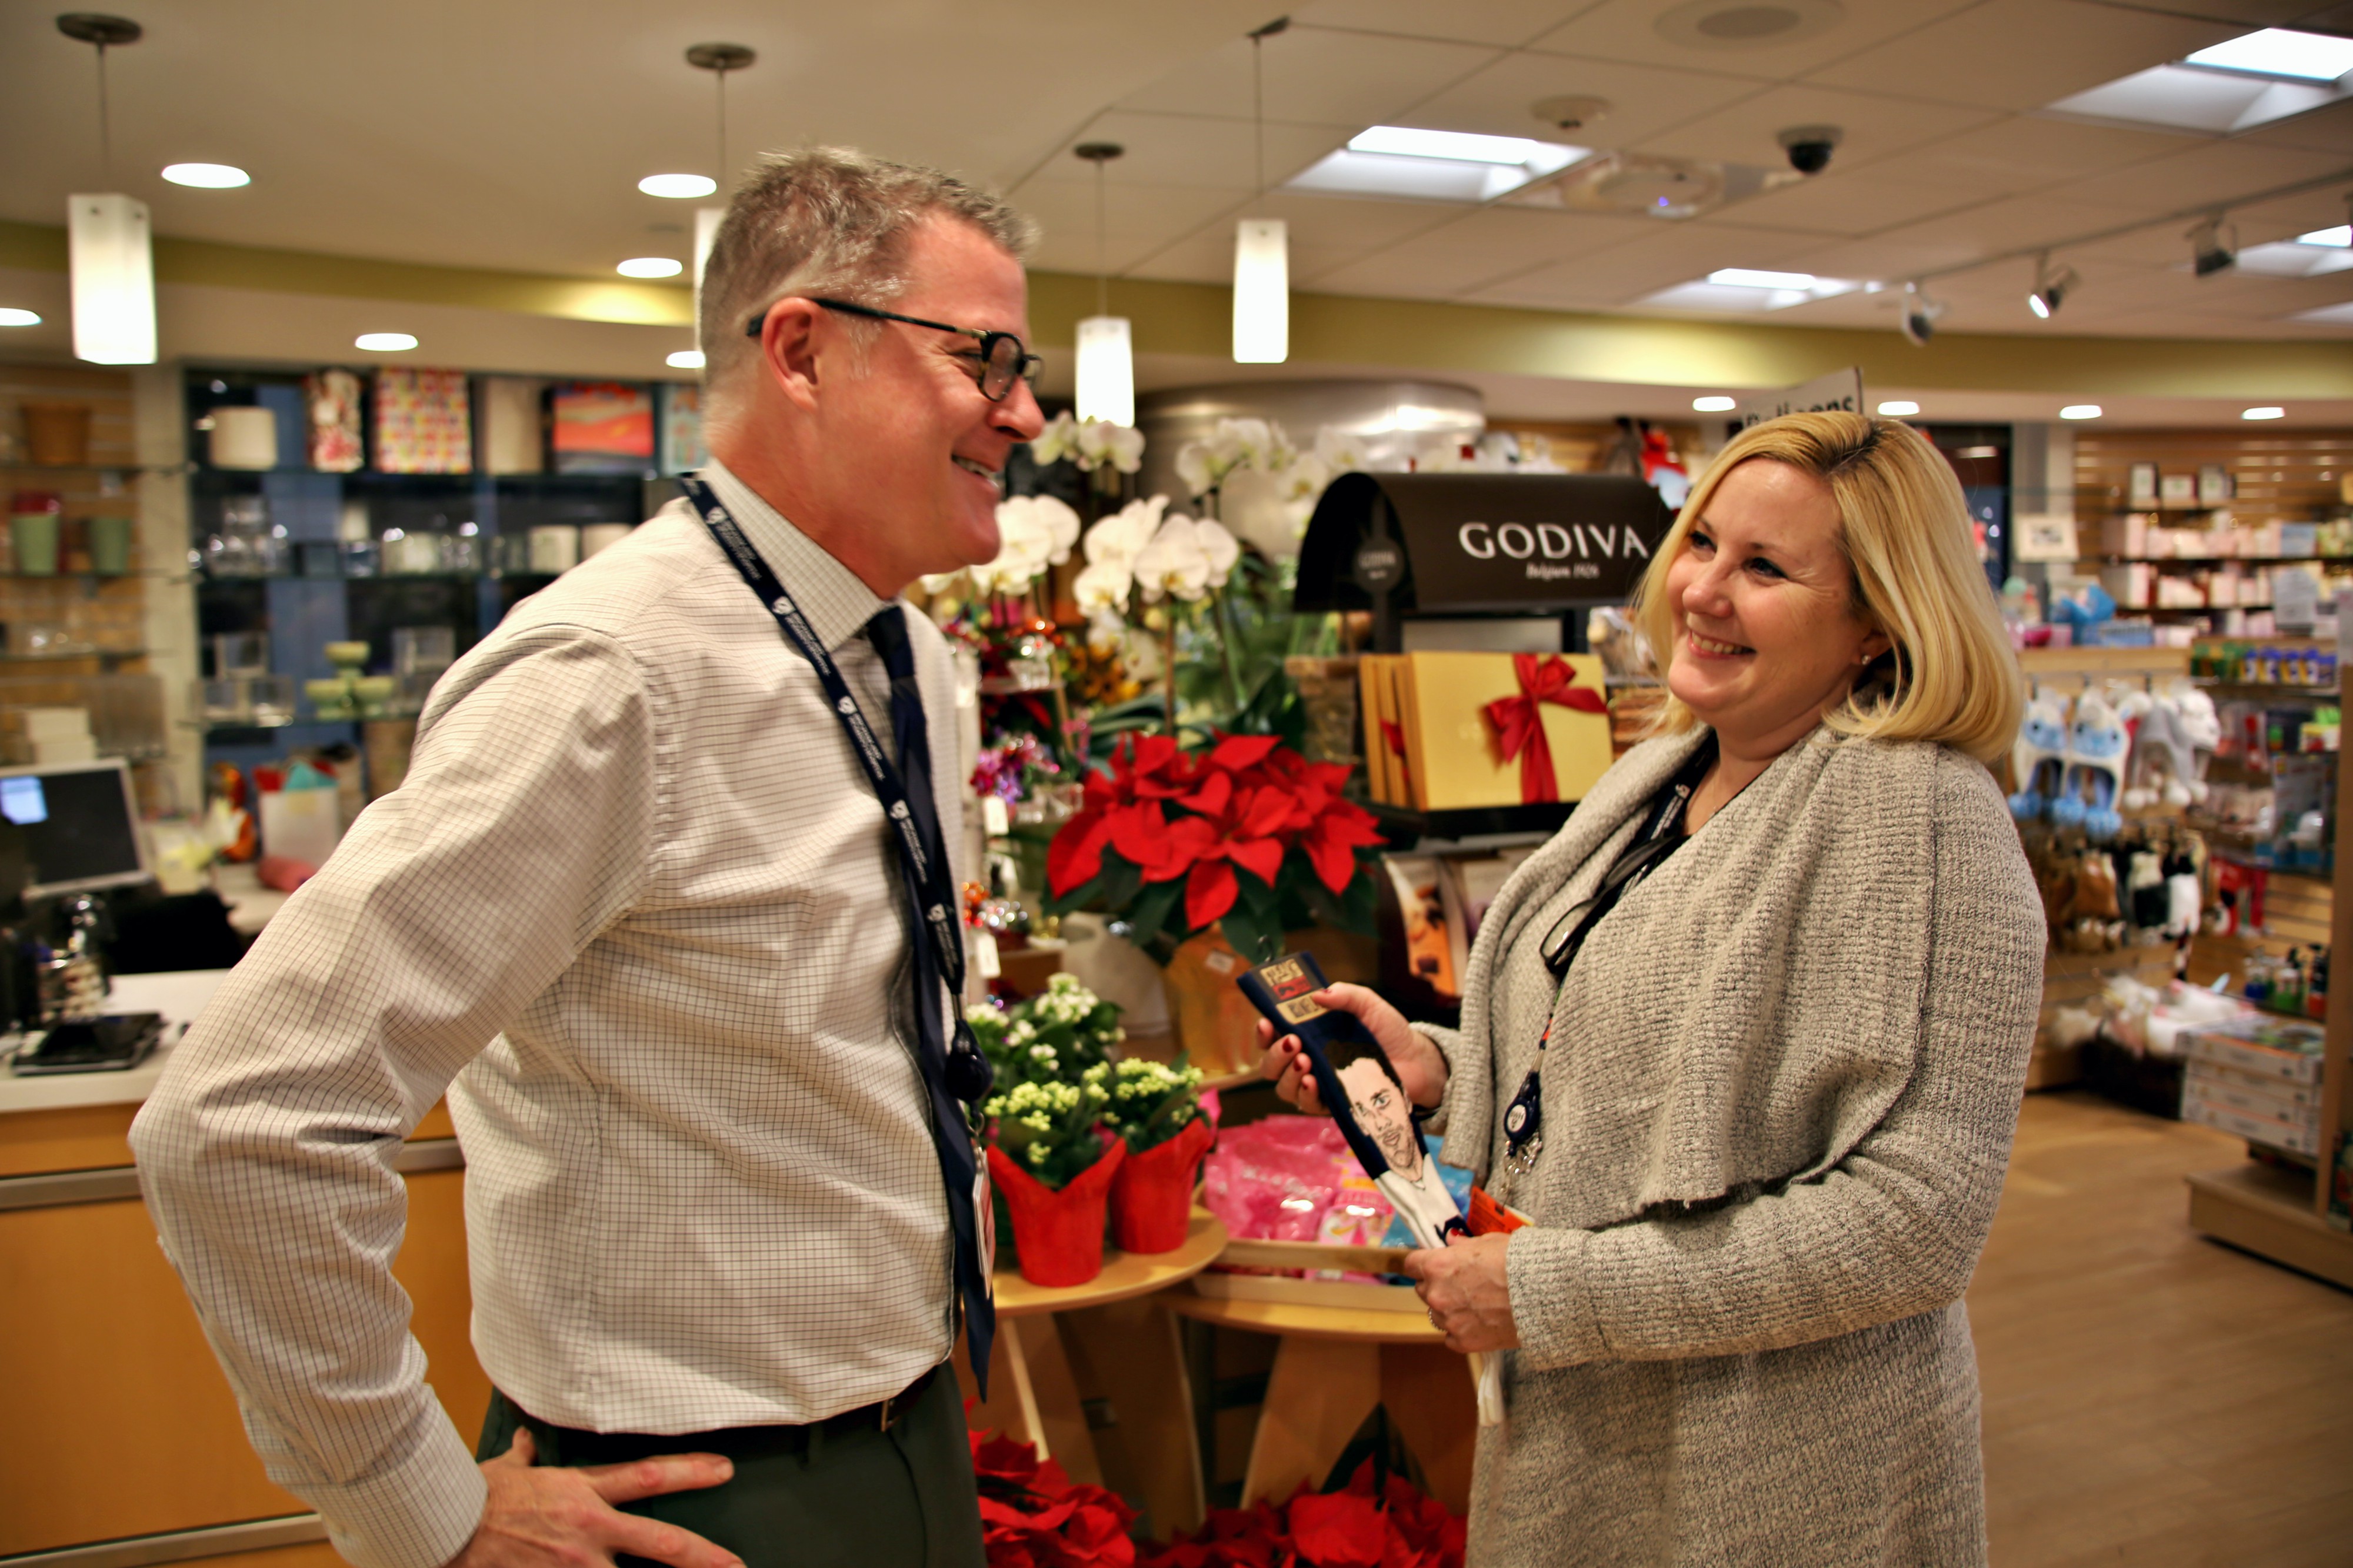 From left: Patrick Lally and Wendy Martinez chat in the Shop on the Pike.